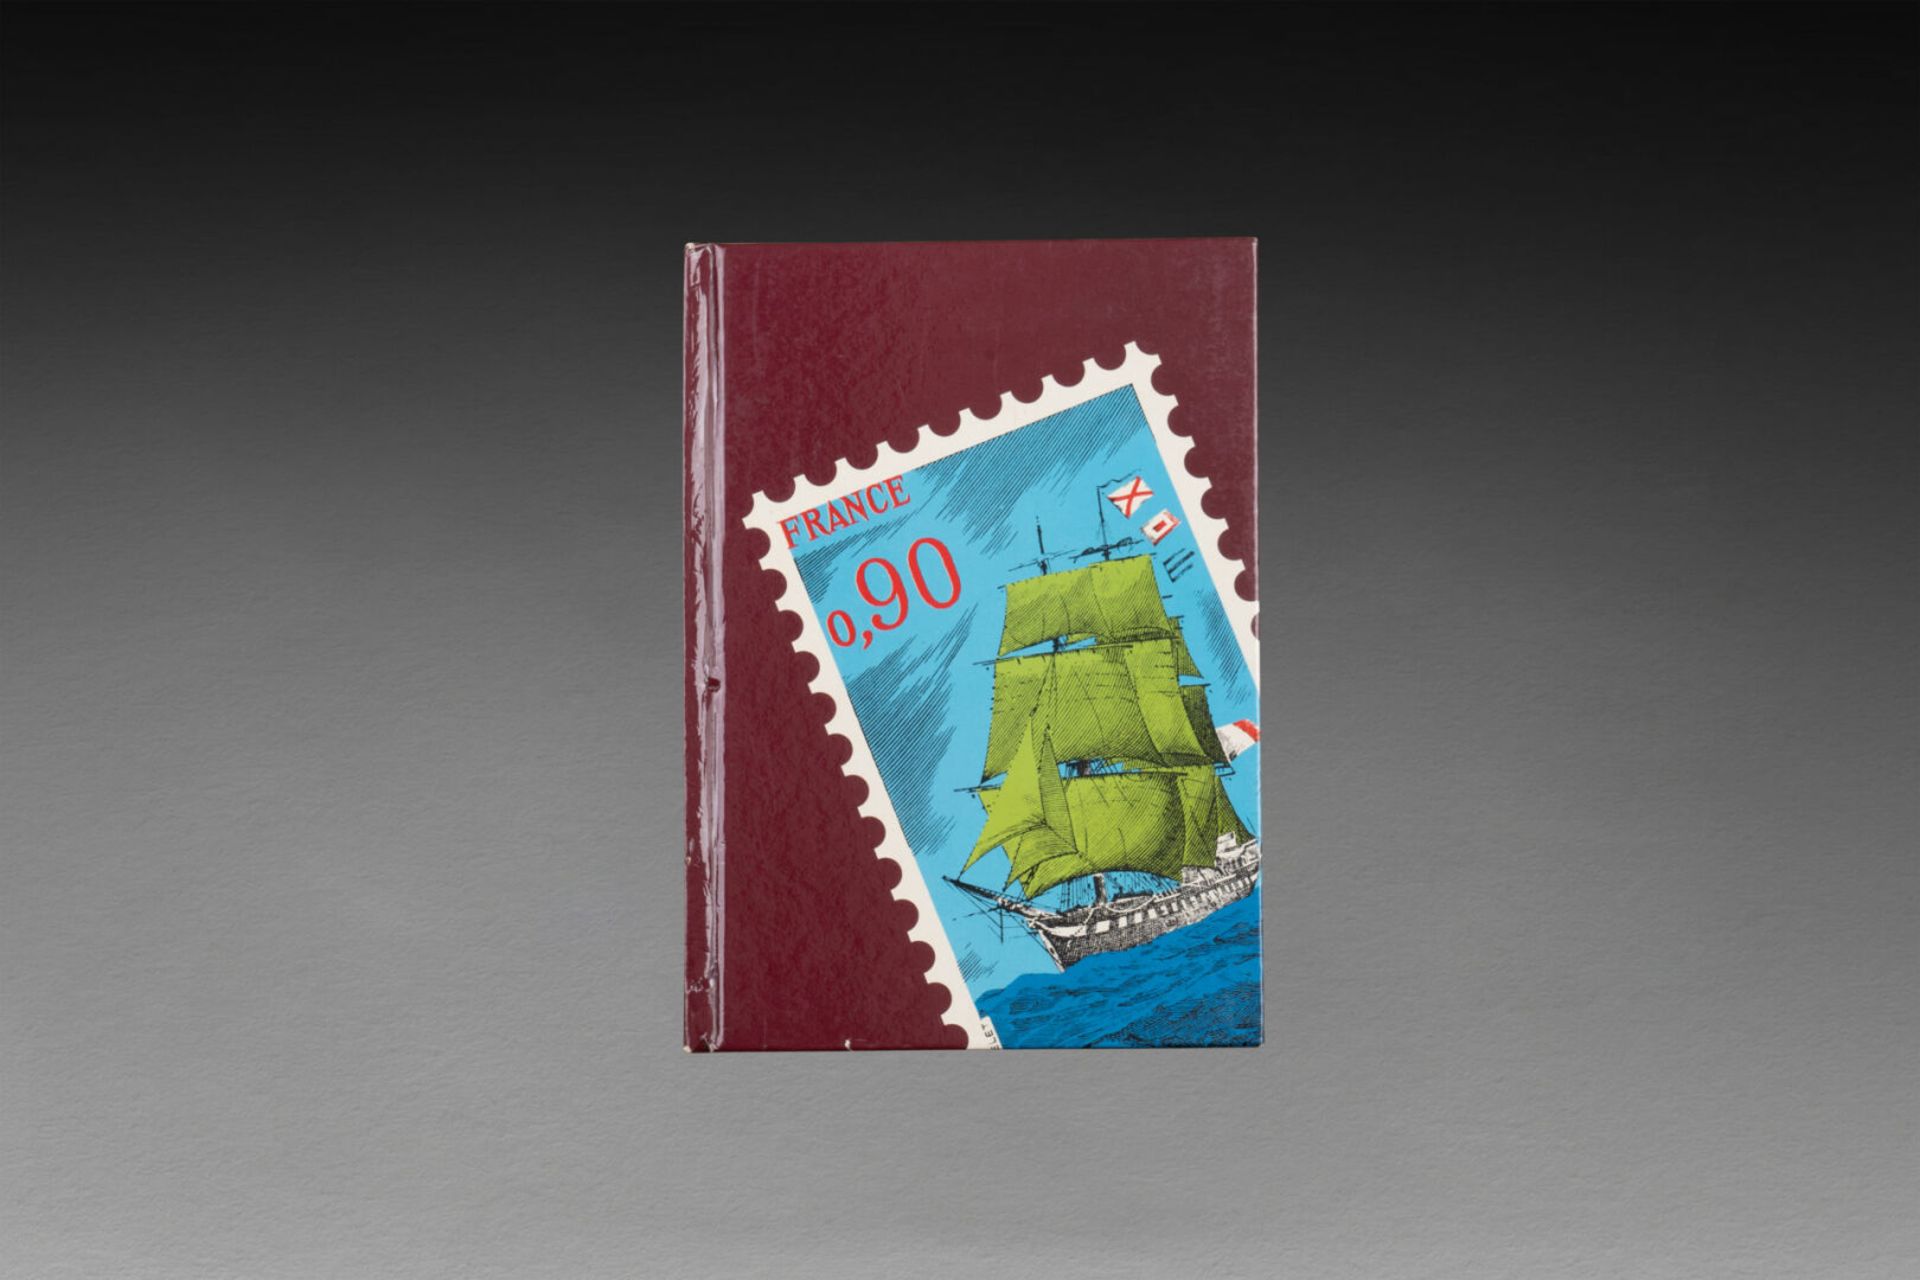 TIMBRES - Image 31 of 57